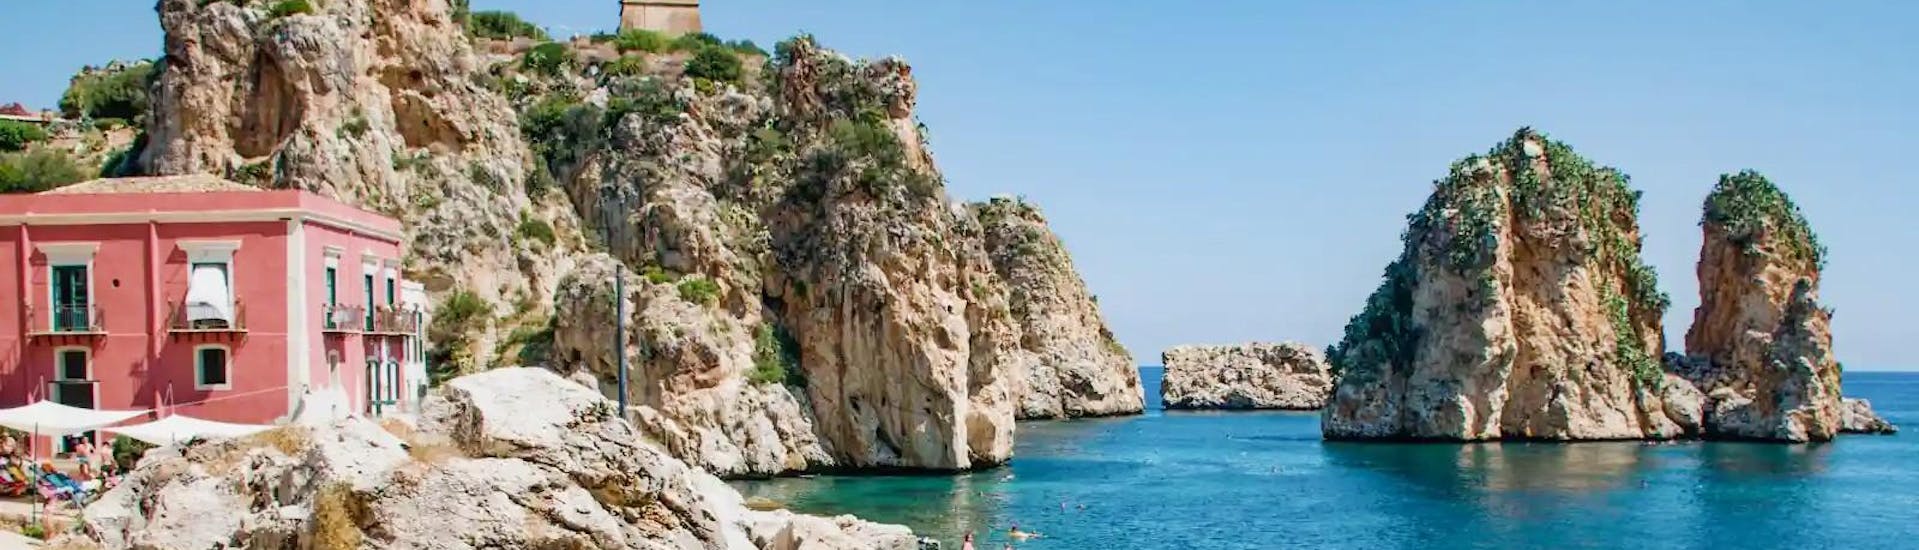 Photo of the impressive Scopello stacks, which can be visited on a boat trip by Marina Yachting Sicily San Vito Lo Capo.